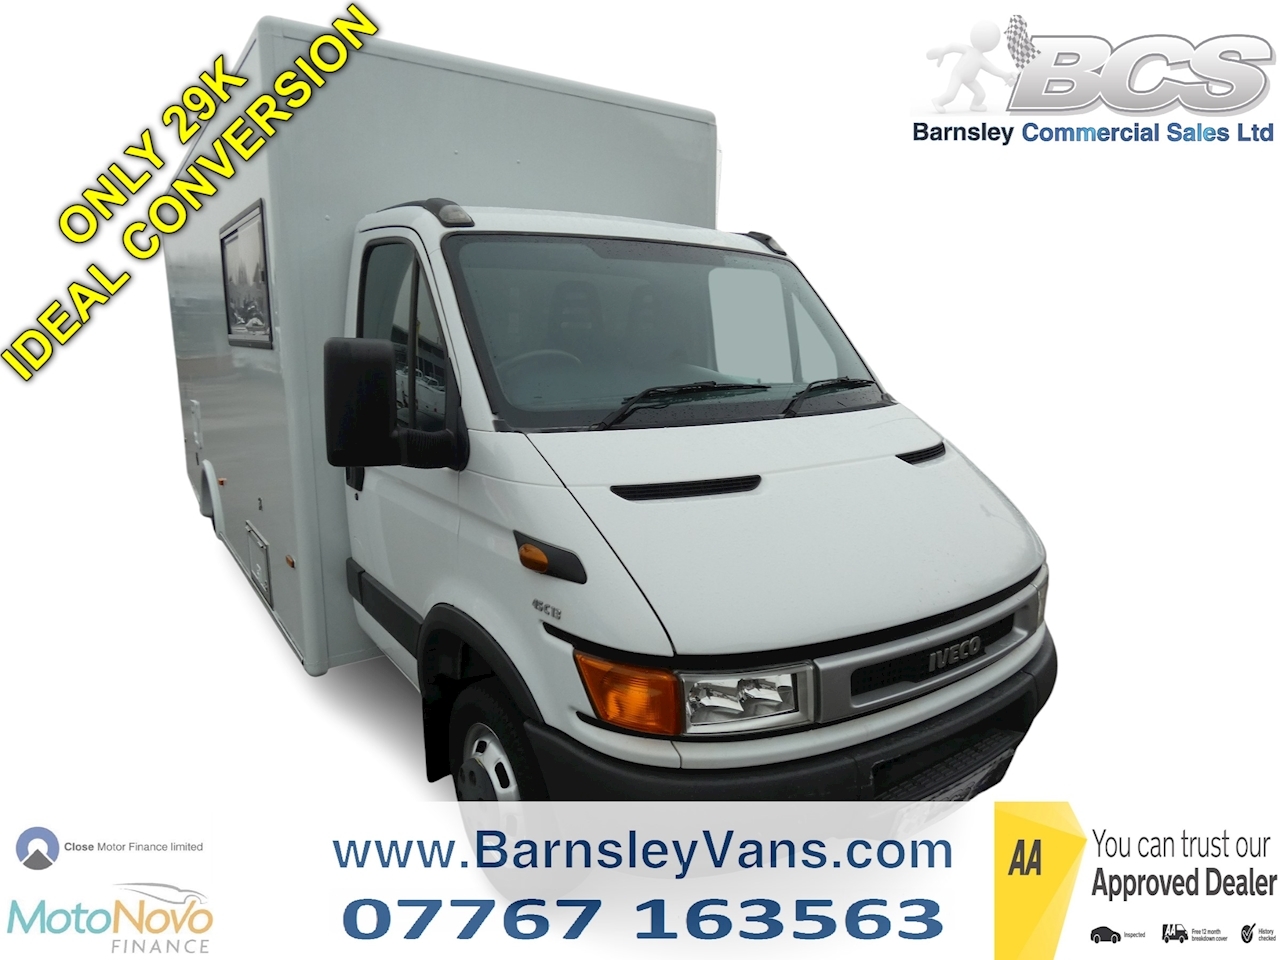 2003 53 IVECO DAILY 45C13 2.8 MOBILE WAITING ROOM OFFICE SHOP